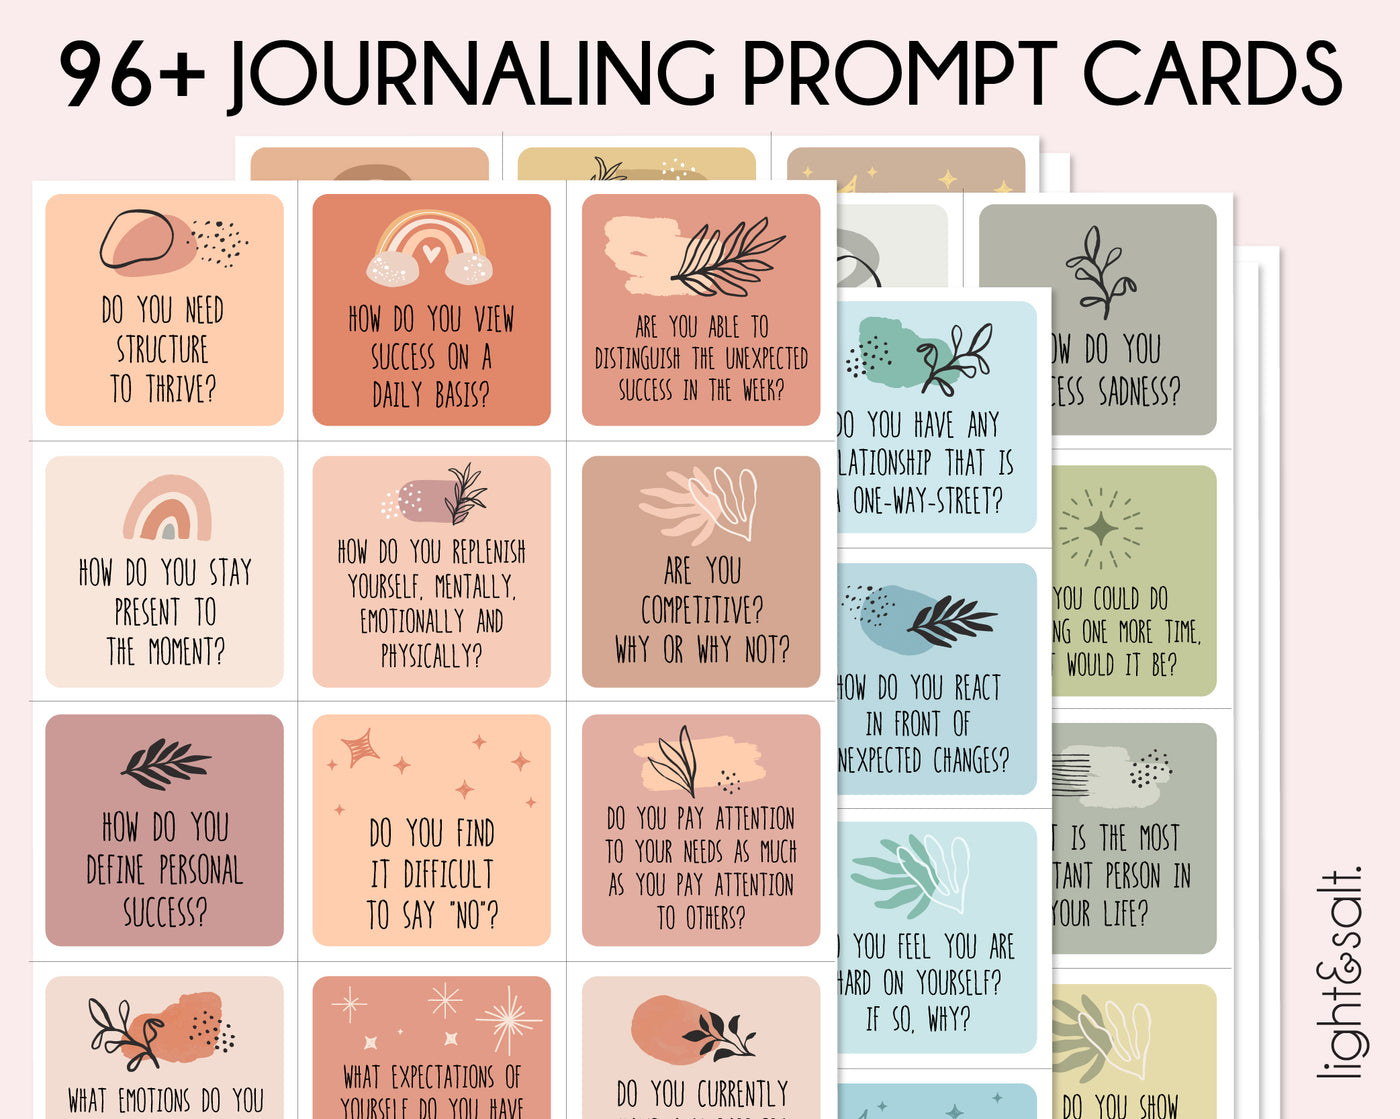 Journaling prompt cards